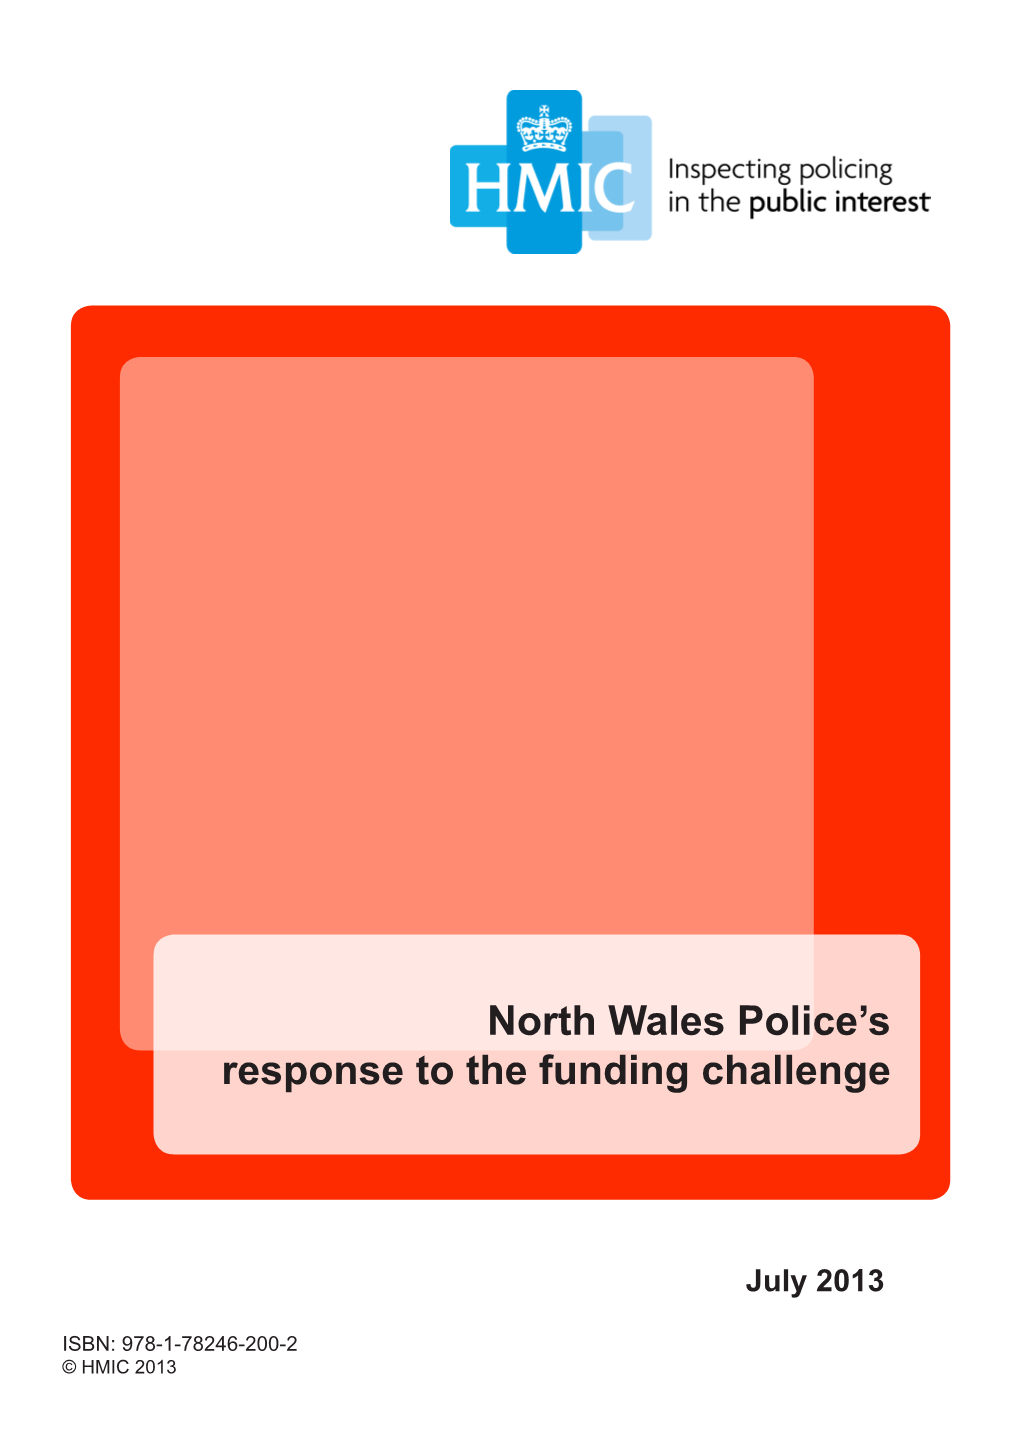 North Wales Police's Response to the Funding Challenge